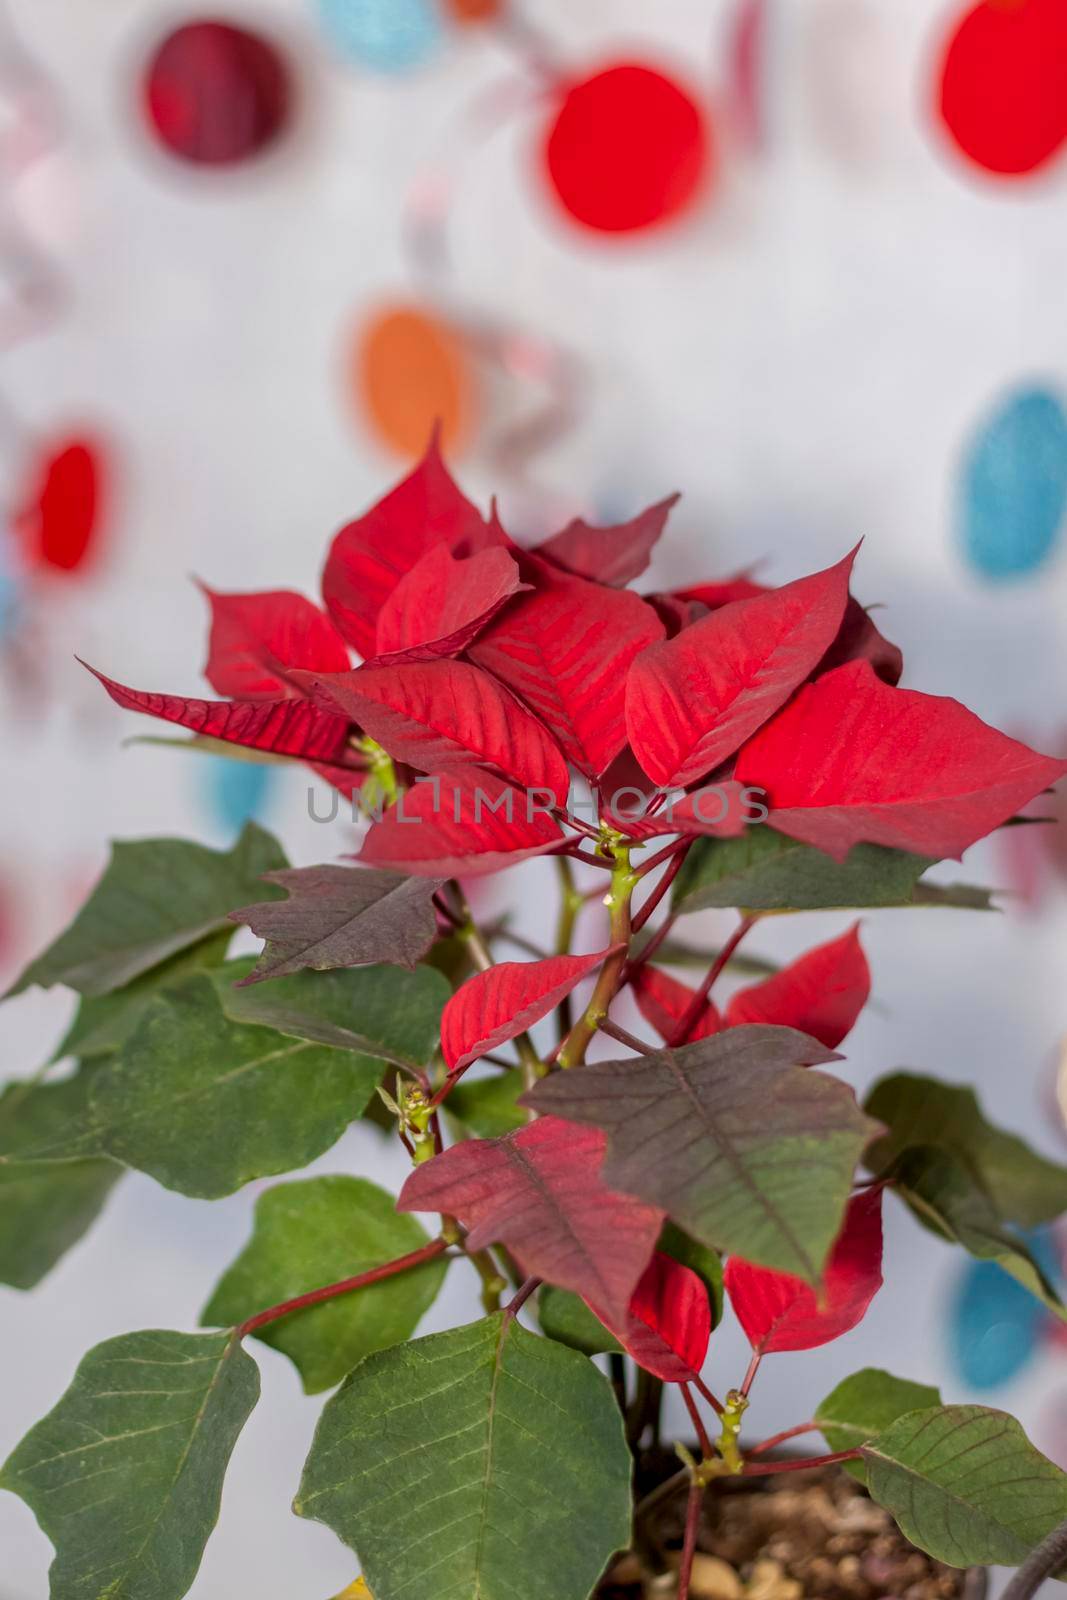 Pot with a home plant on a light background. A plant with red and green leaves. Poinsettia in a pot on a shelf.